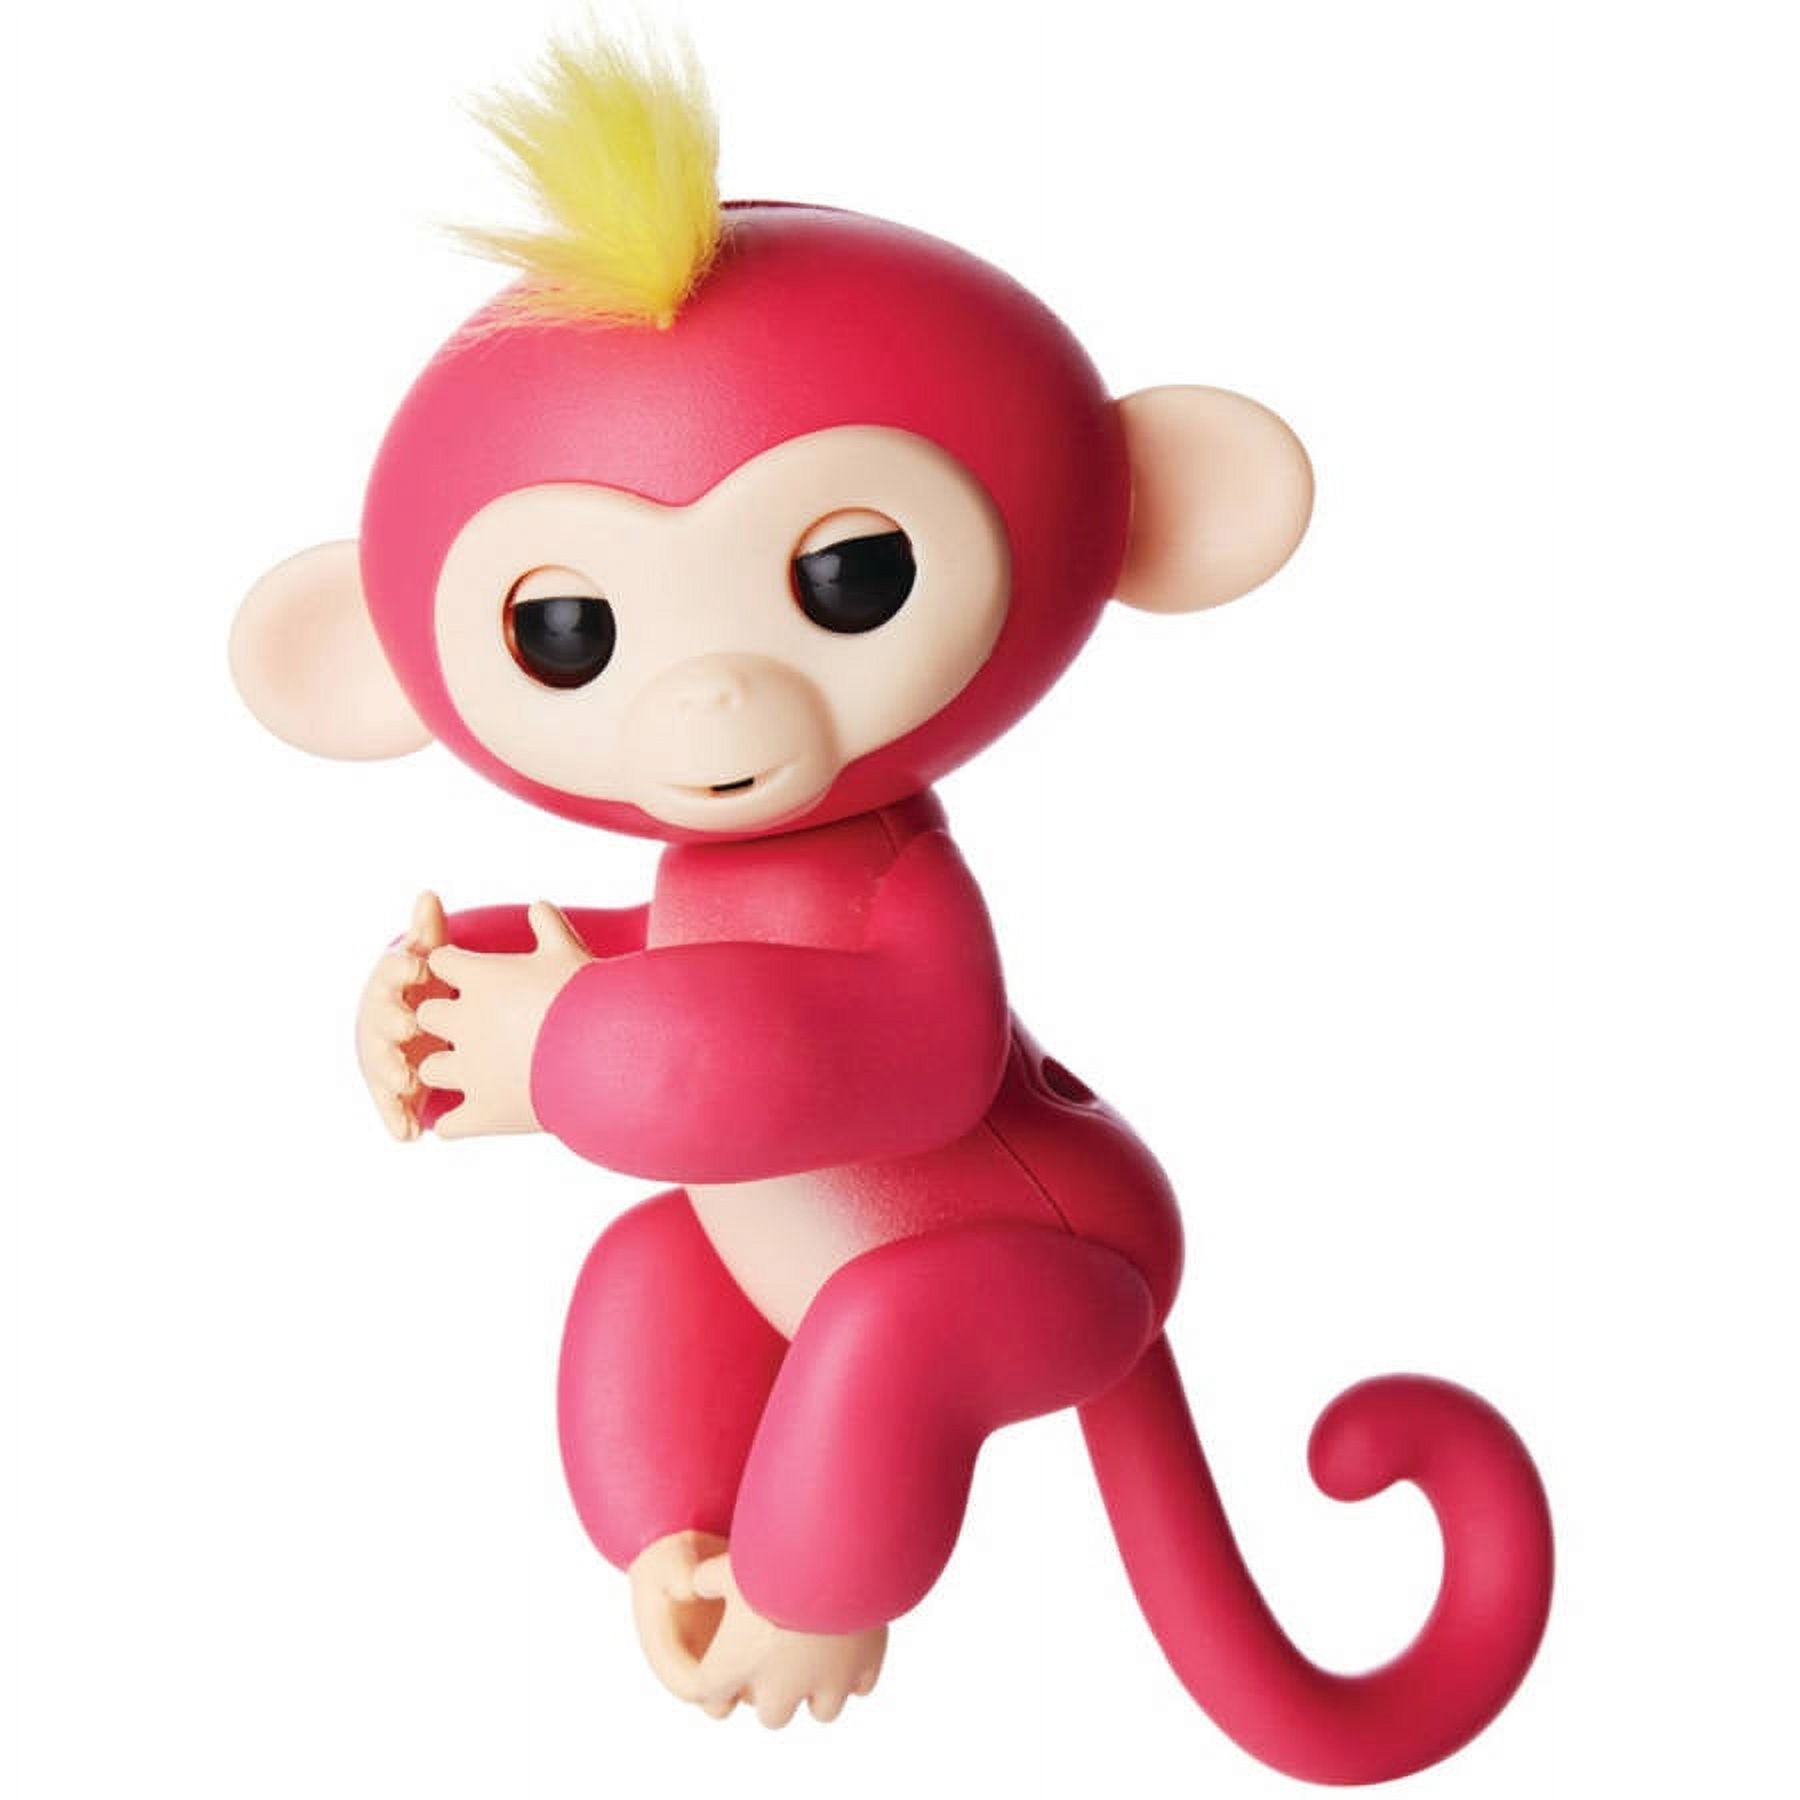 Fingerlings - Interactive Baby Monkey - Bella (Pink with Yellow Hair) By WowWee - image 1 of 4